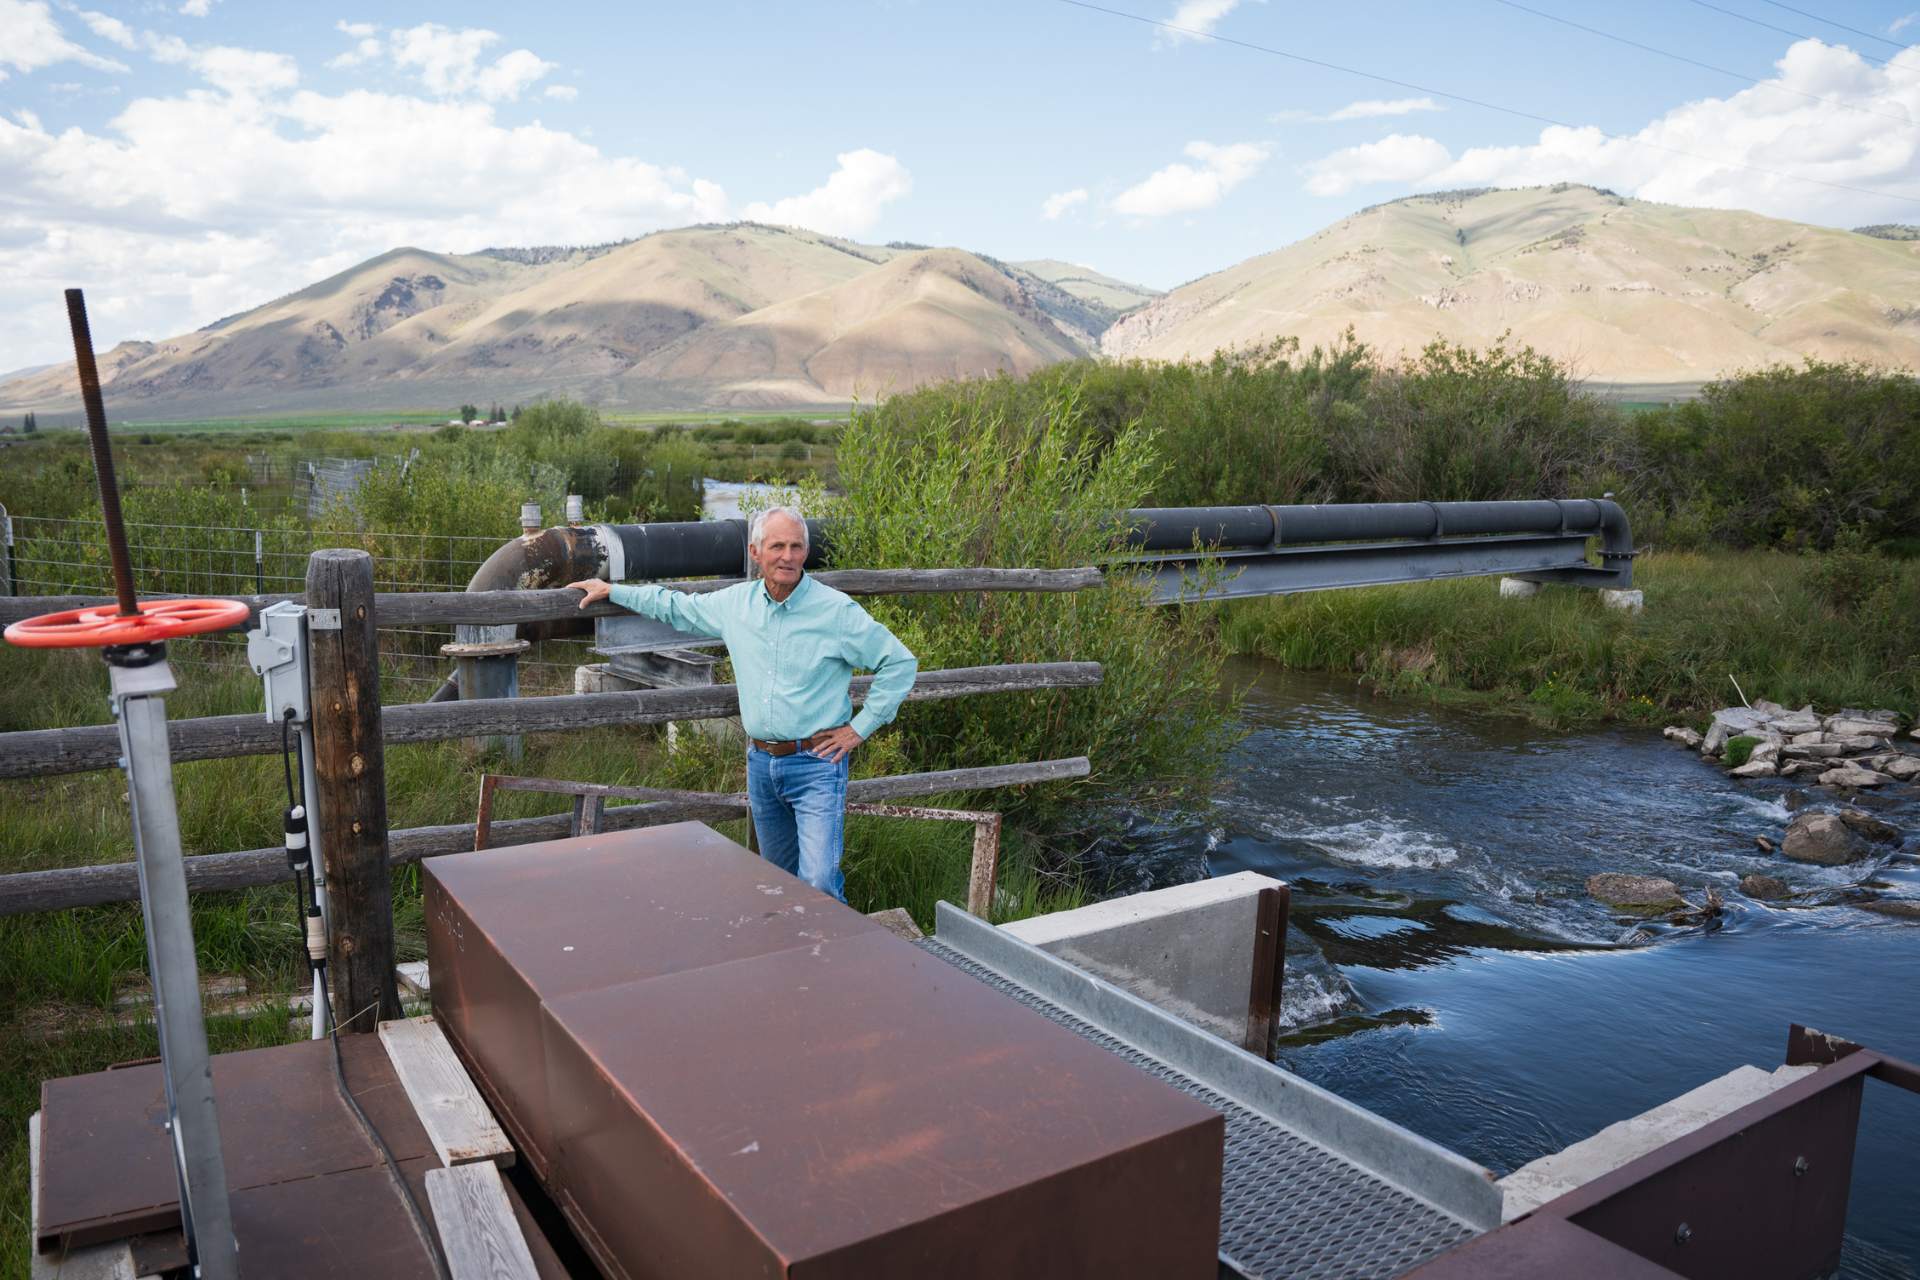 rancher and former Idaho congressman Merrill Beyeler stands near a large fish screen and irrigation pump, a collaborative solution that allowed several ranchers to reconnect tributaries of the Lemhi River that had been dry for nearly 125 years.